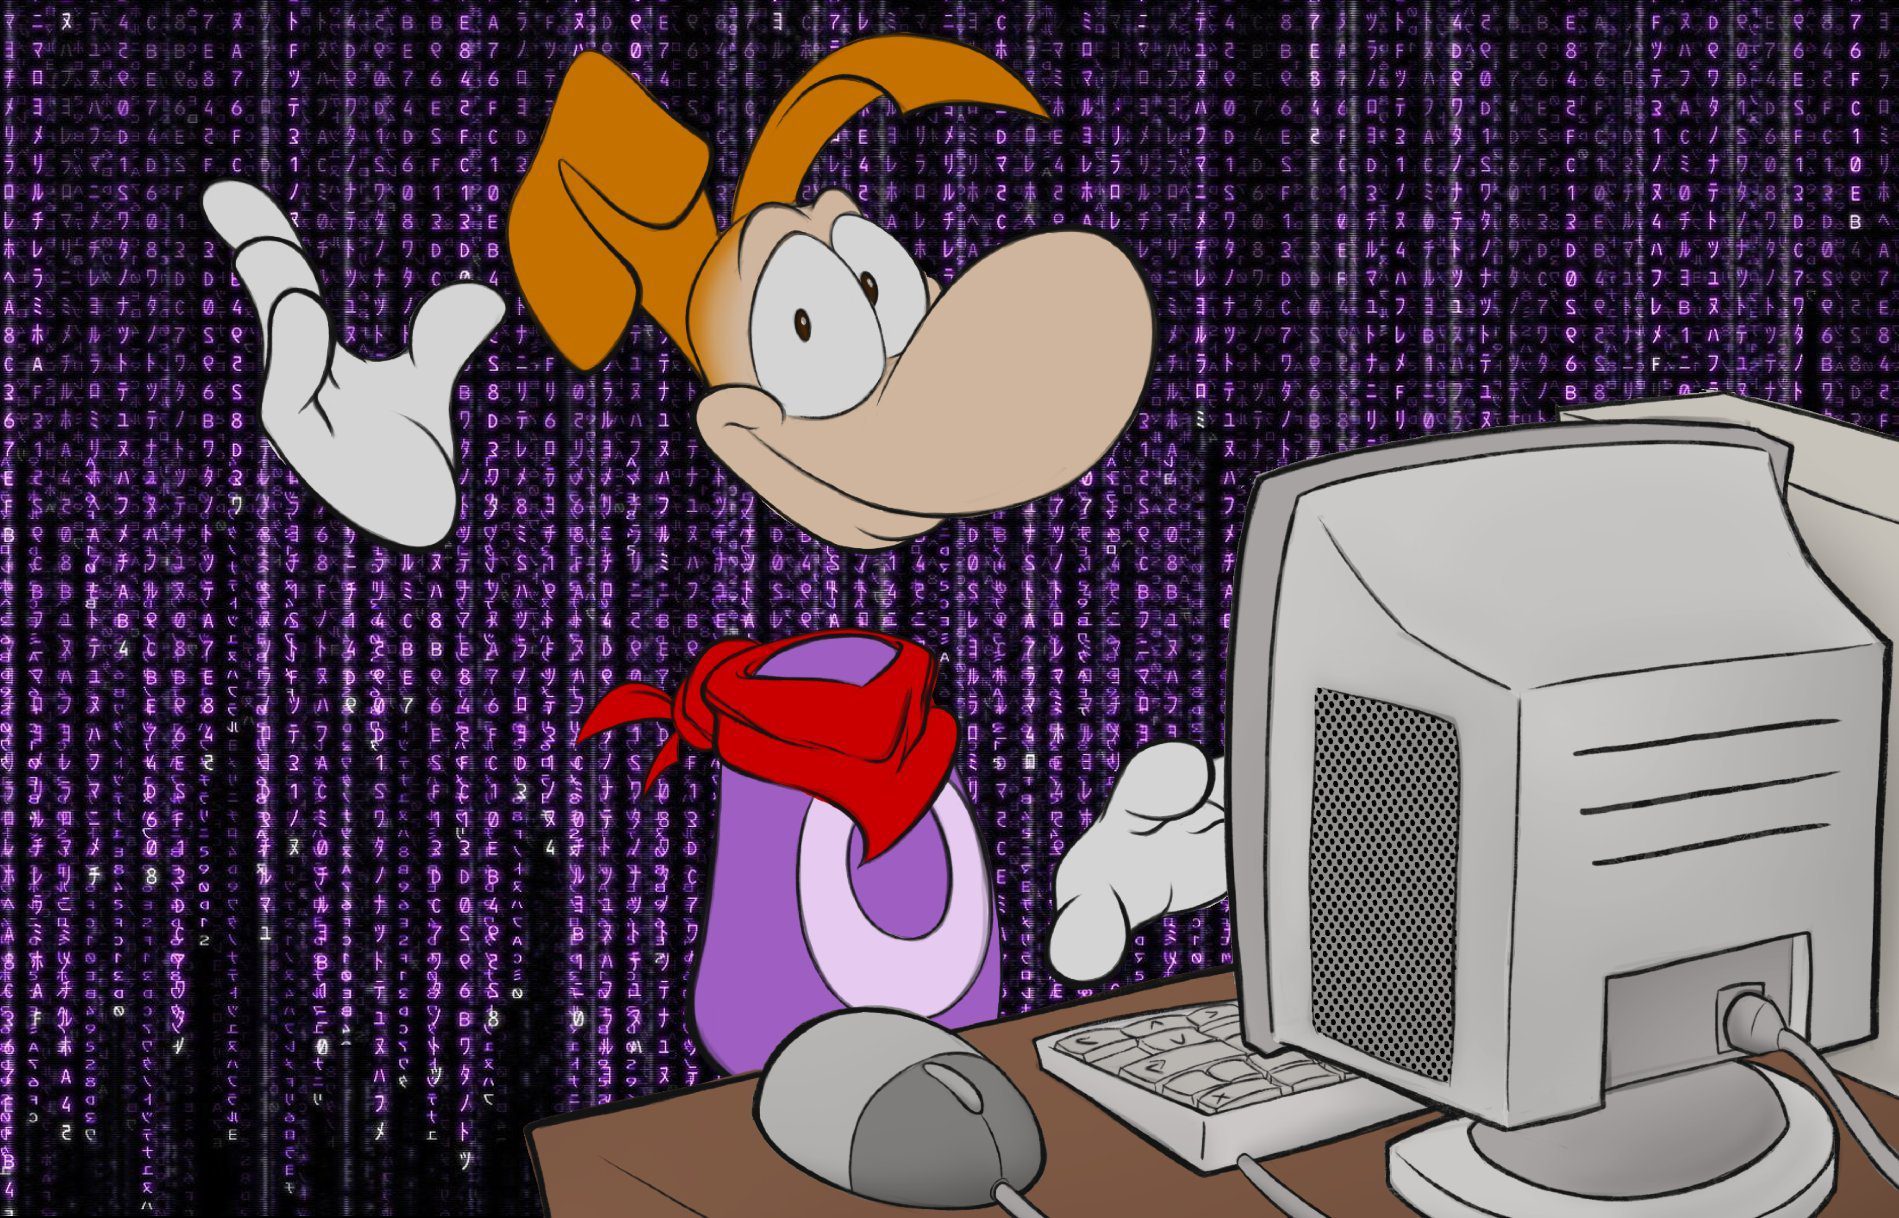 An image showing Rayman sitting in front of a computer.